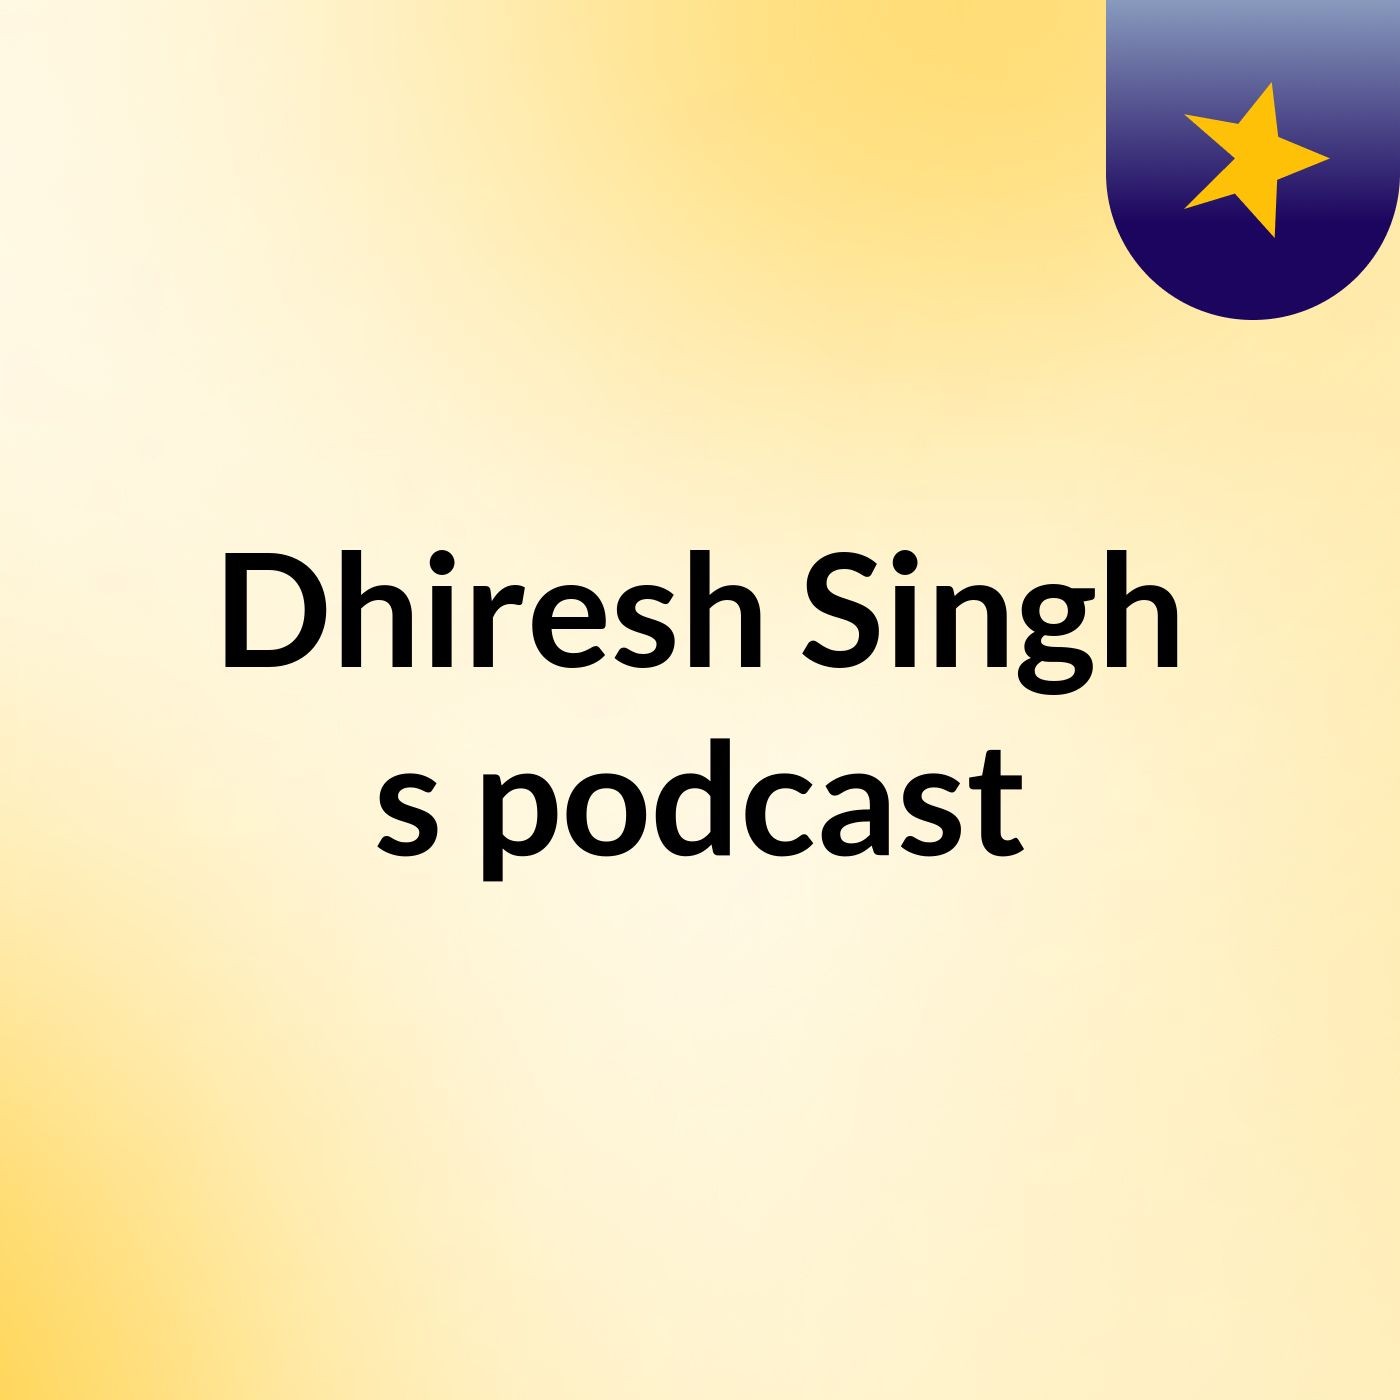 Episode 7 - Dhiresh Singh's podcast